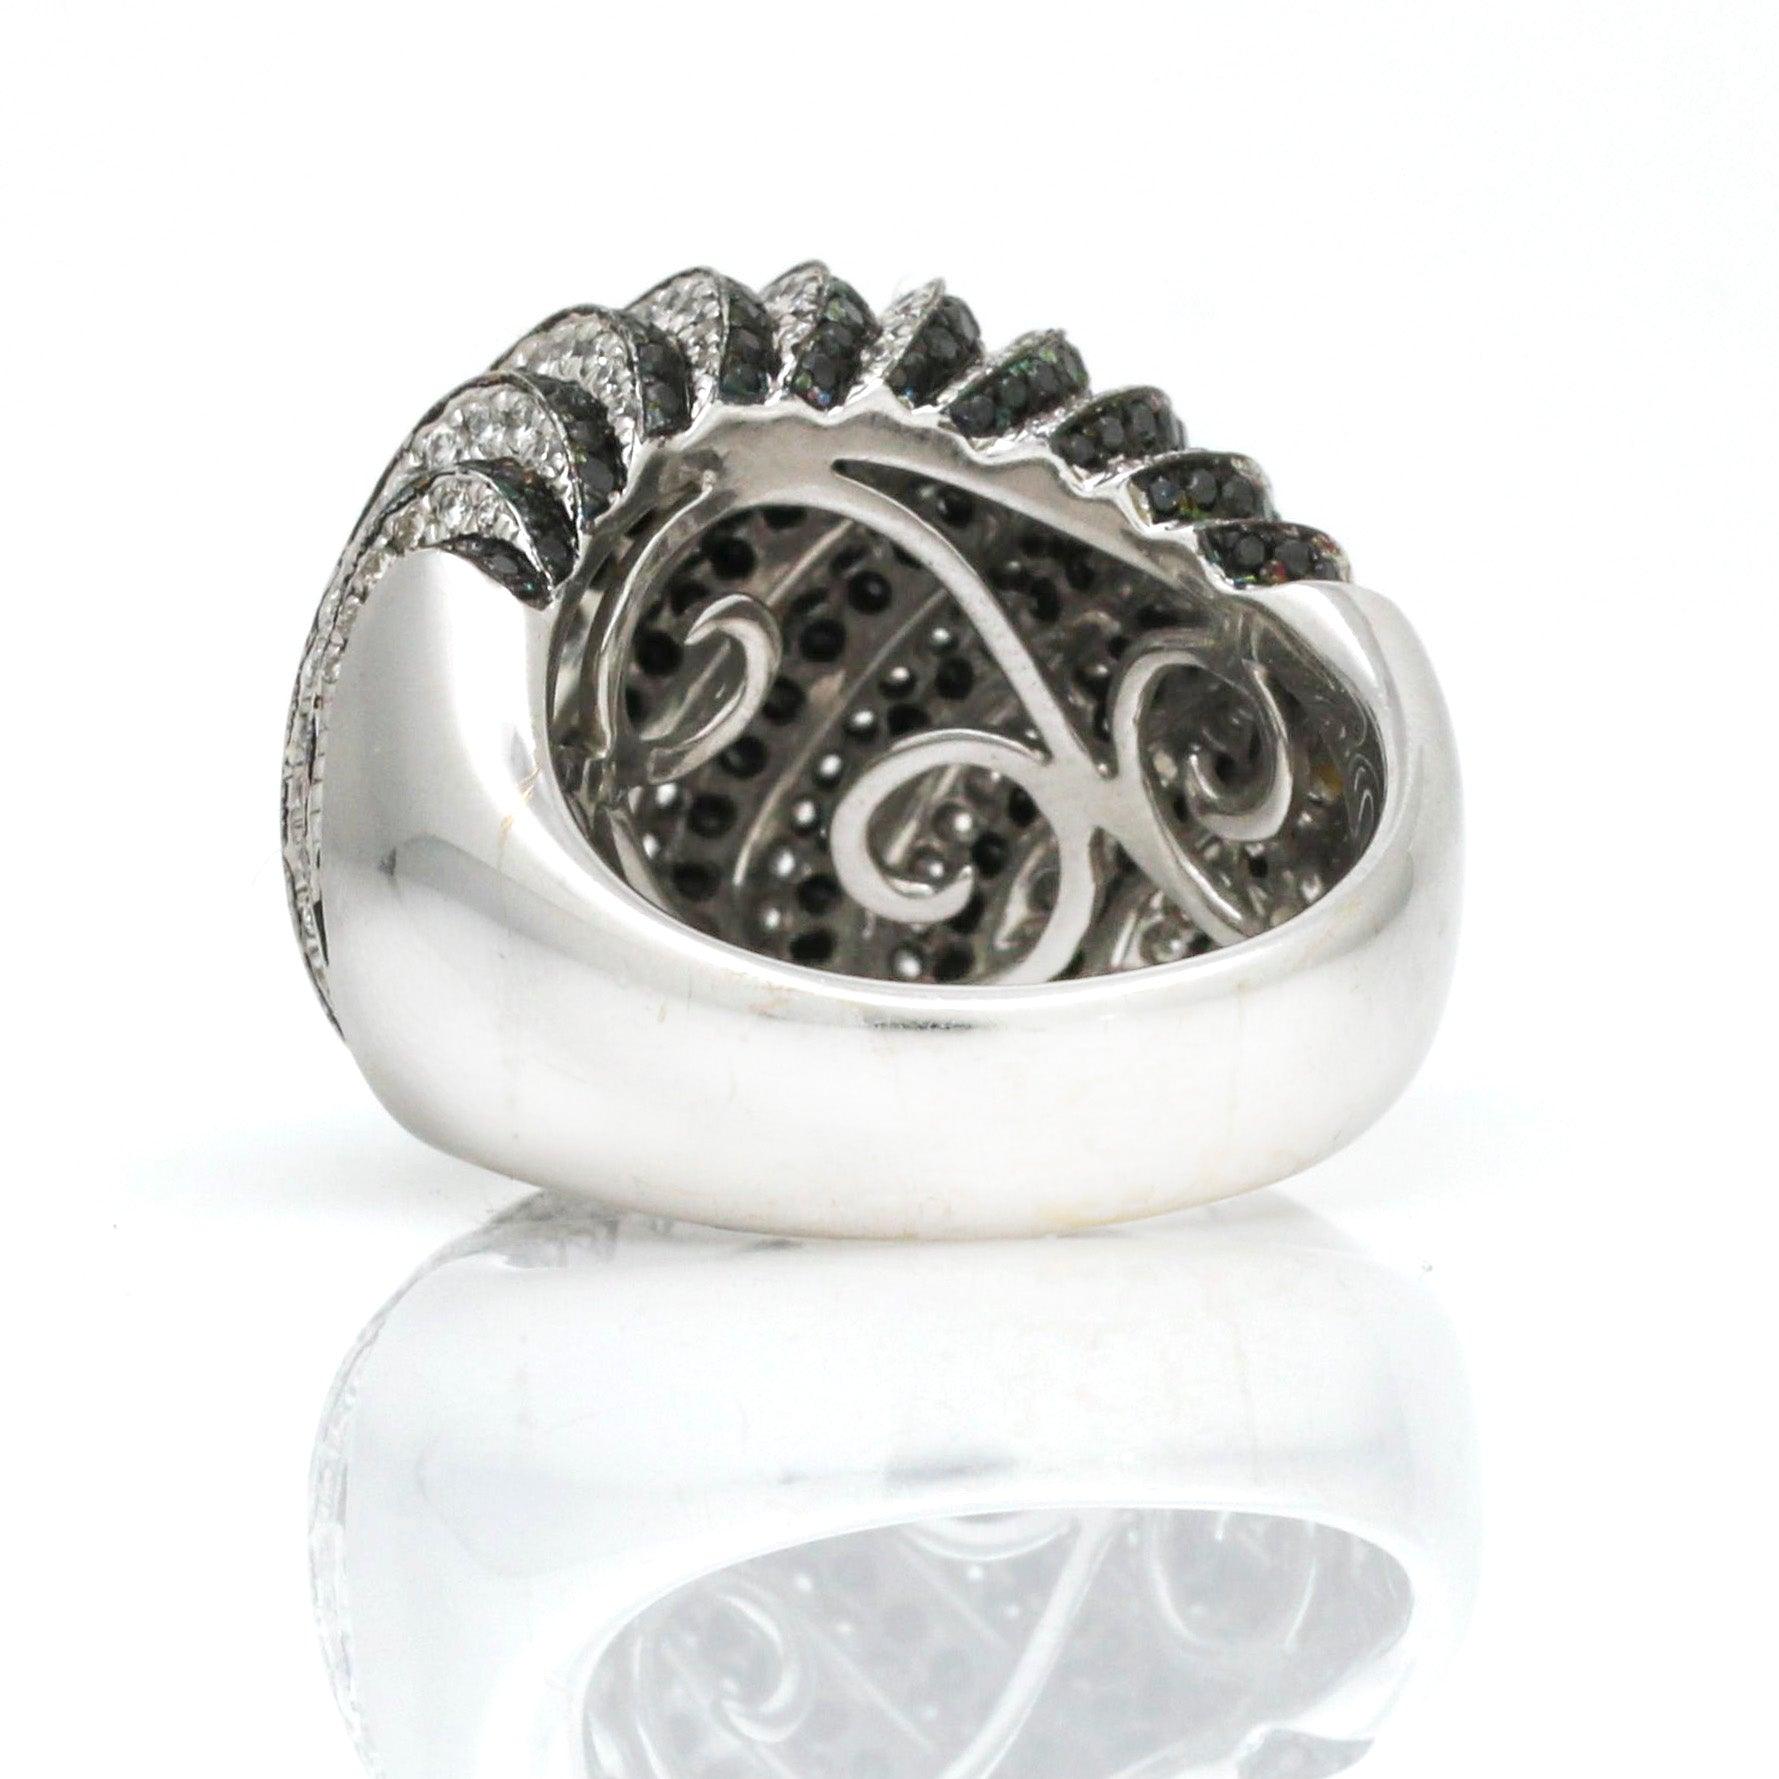 Signed Black and White Diamond Waves Dome Statement Ring in 18k White Gold - 31 Jewels Inc.